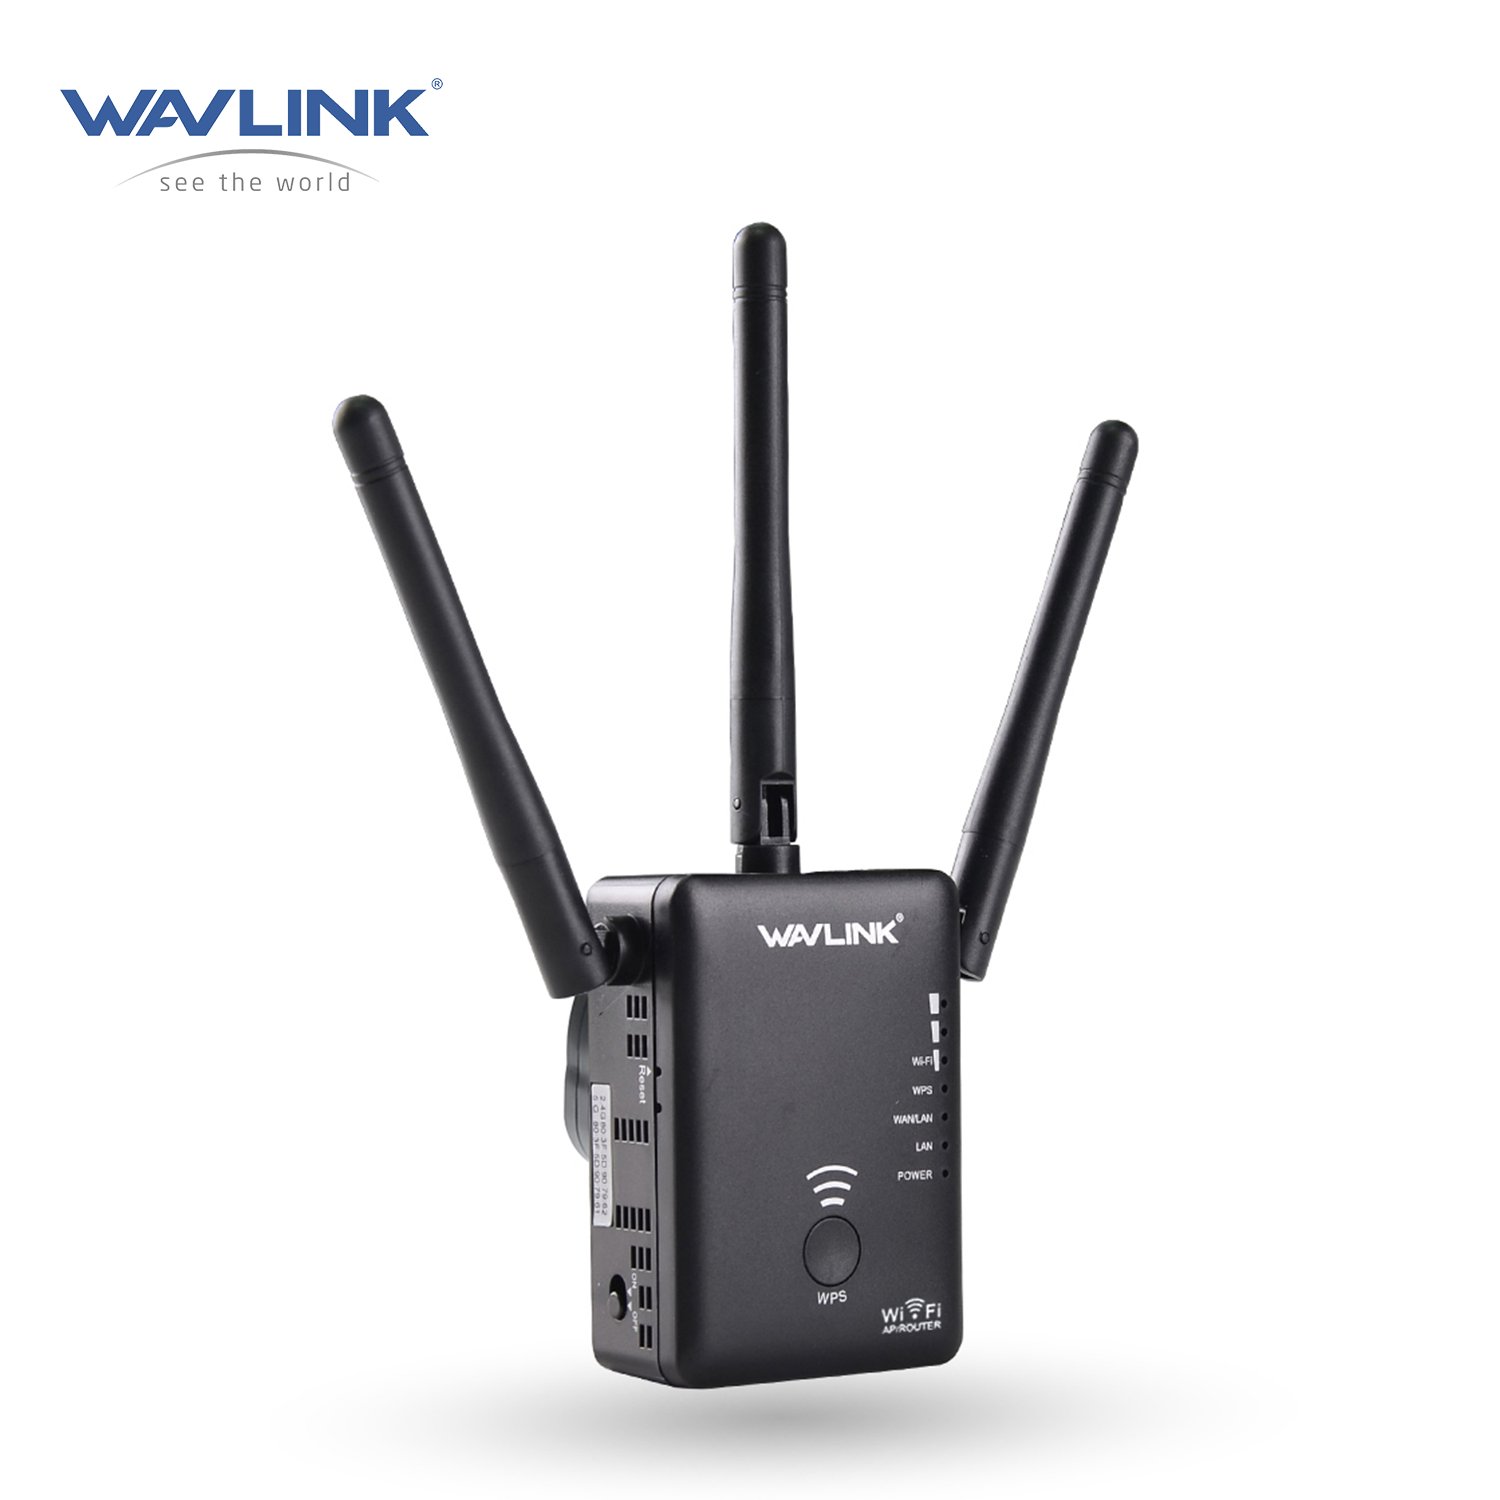 Wavlink AC750 Dual Band Wireless Range Extender Repeater Router WPS Button